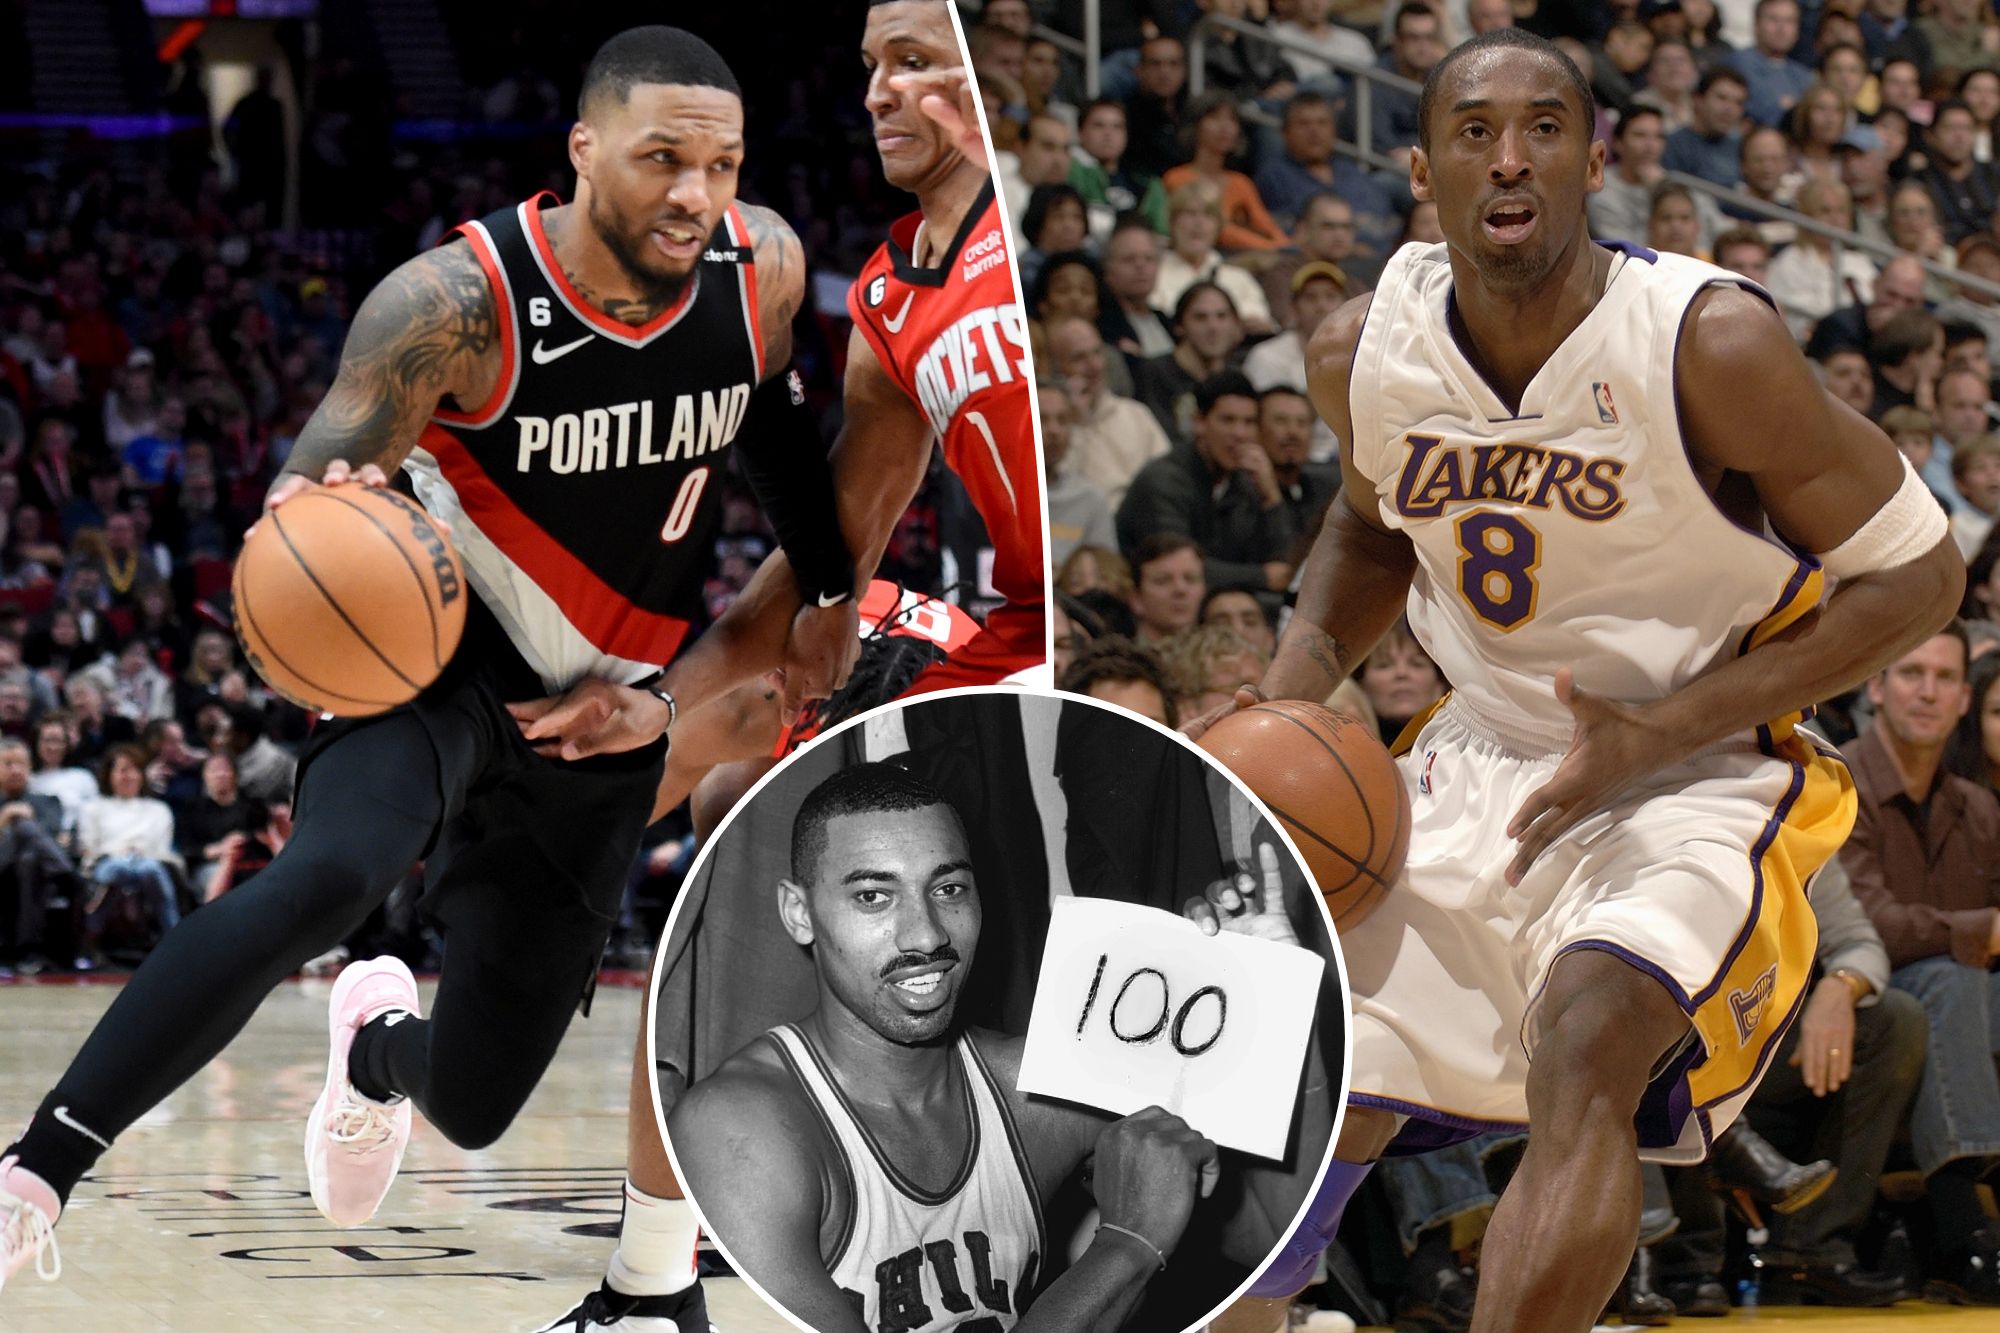 list of basketball players who have scored 100 points in a single game